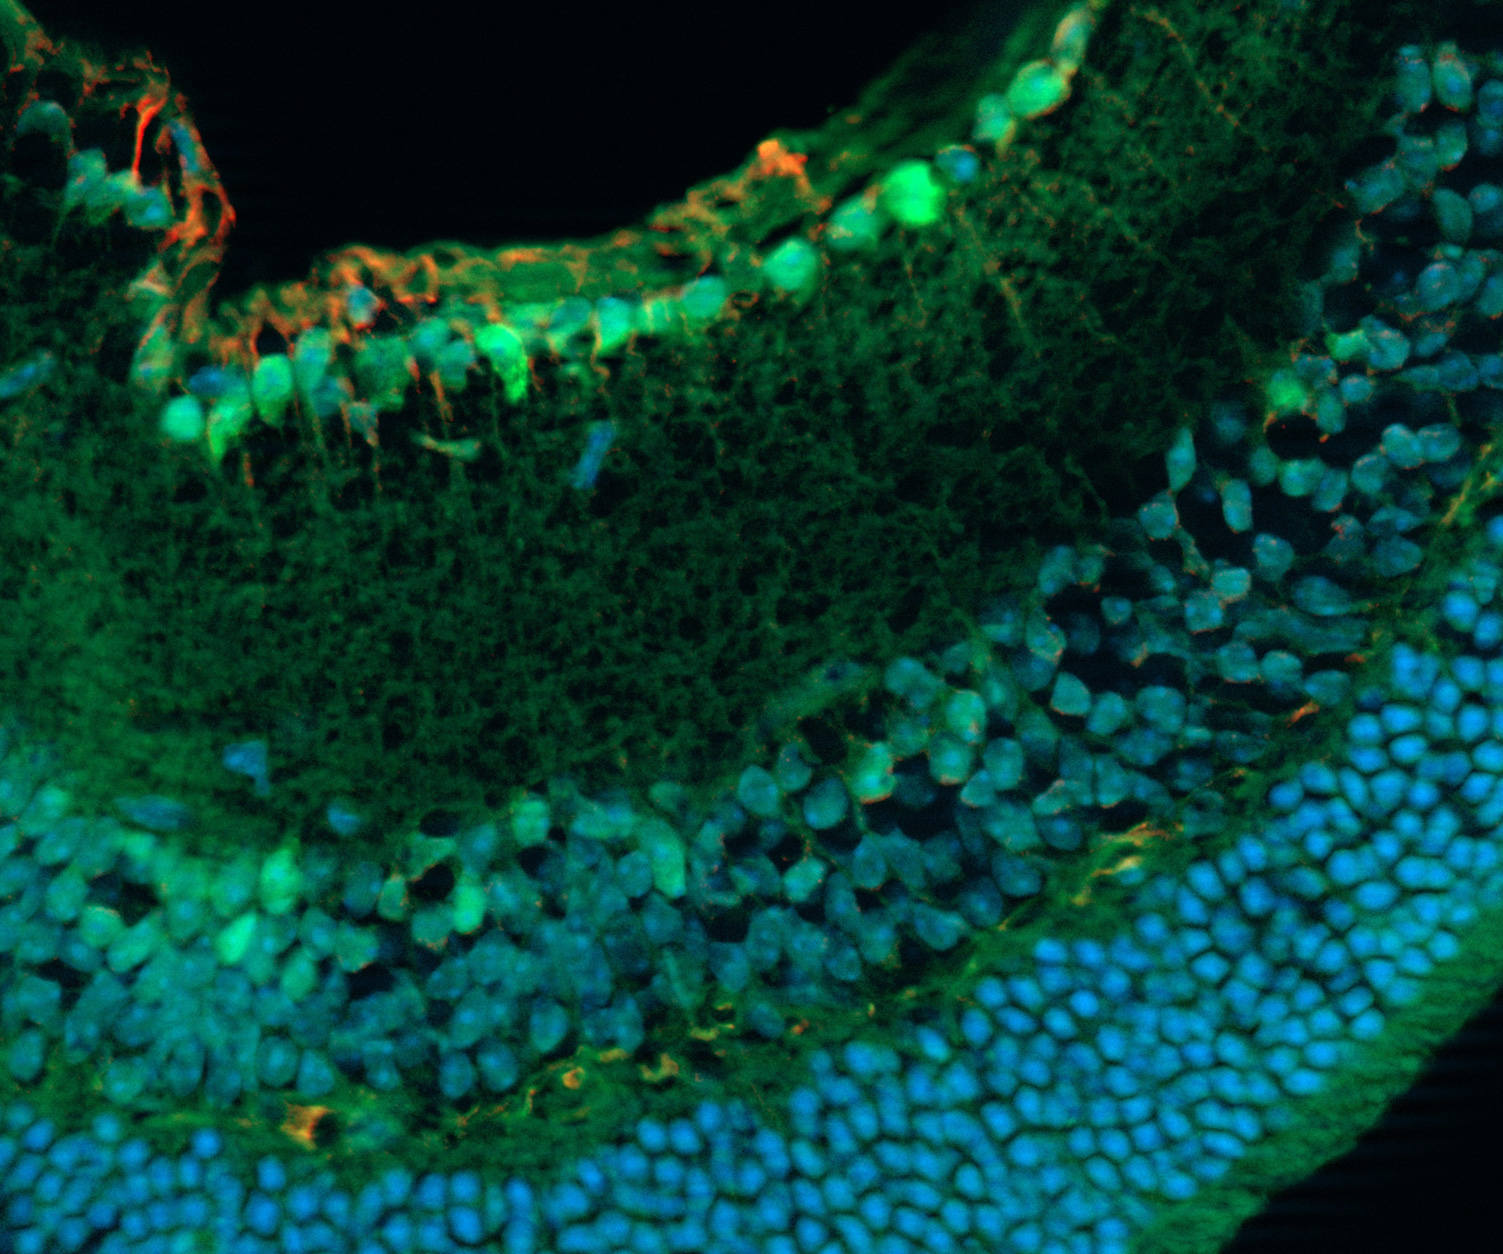 Fixed mouse retina section. Acquired with ZEISS Apotome.2. Specimen courtesy of S. Nan and P. Heiduschka, Department of Ophthalmology, University Medical Center Münster, Germany.